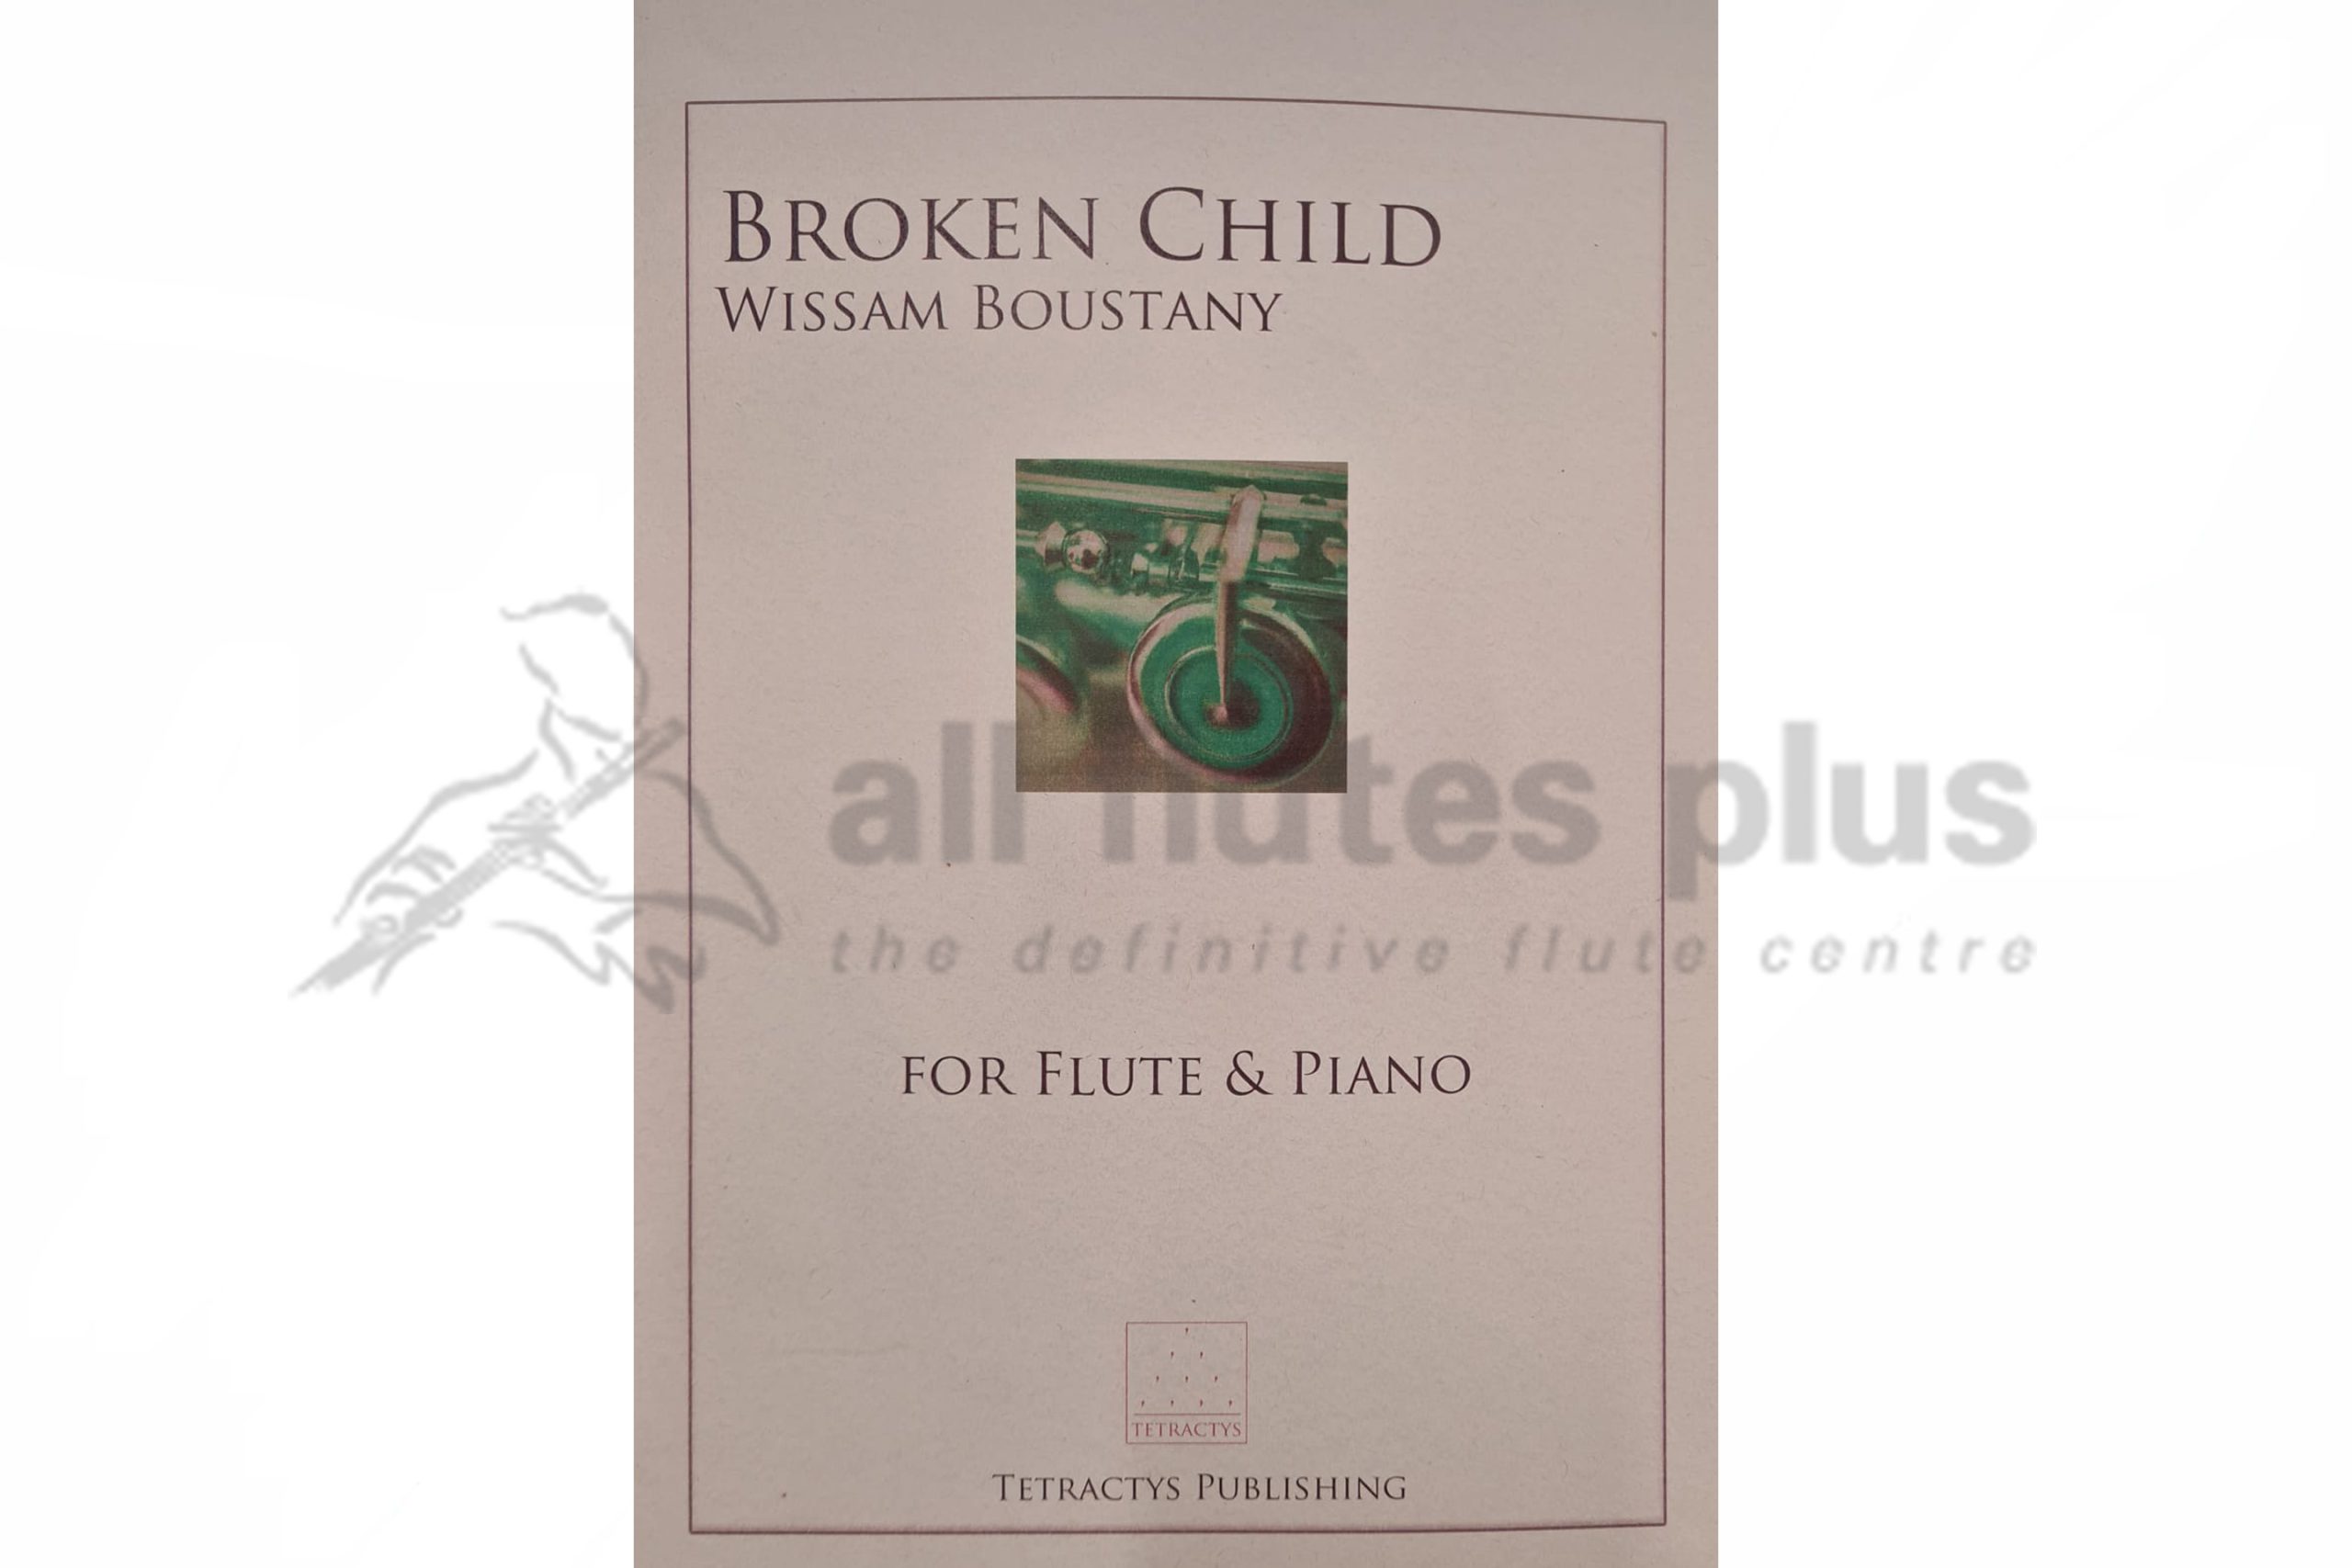 Broken Child for Flute and Piano by Wissam Boustany